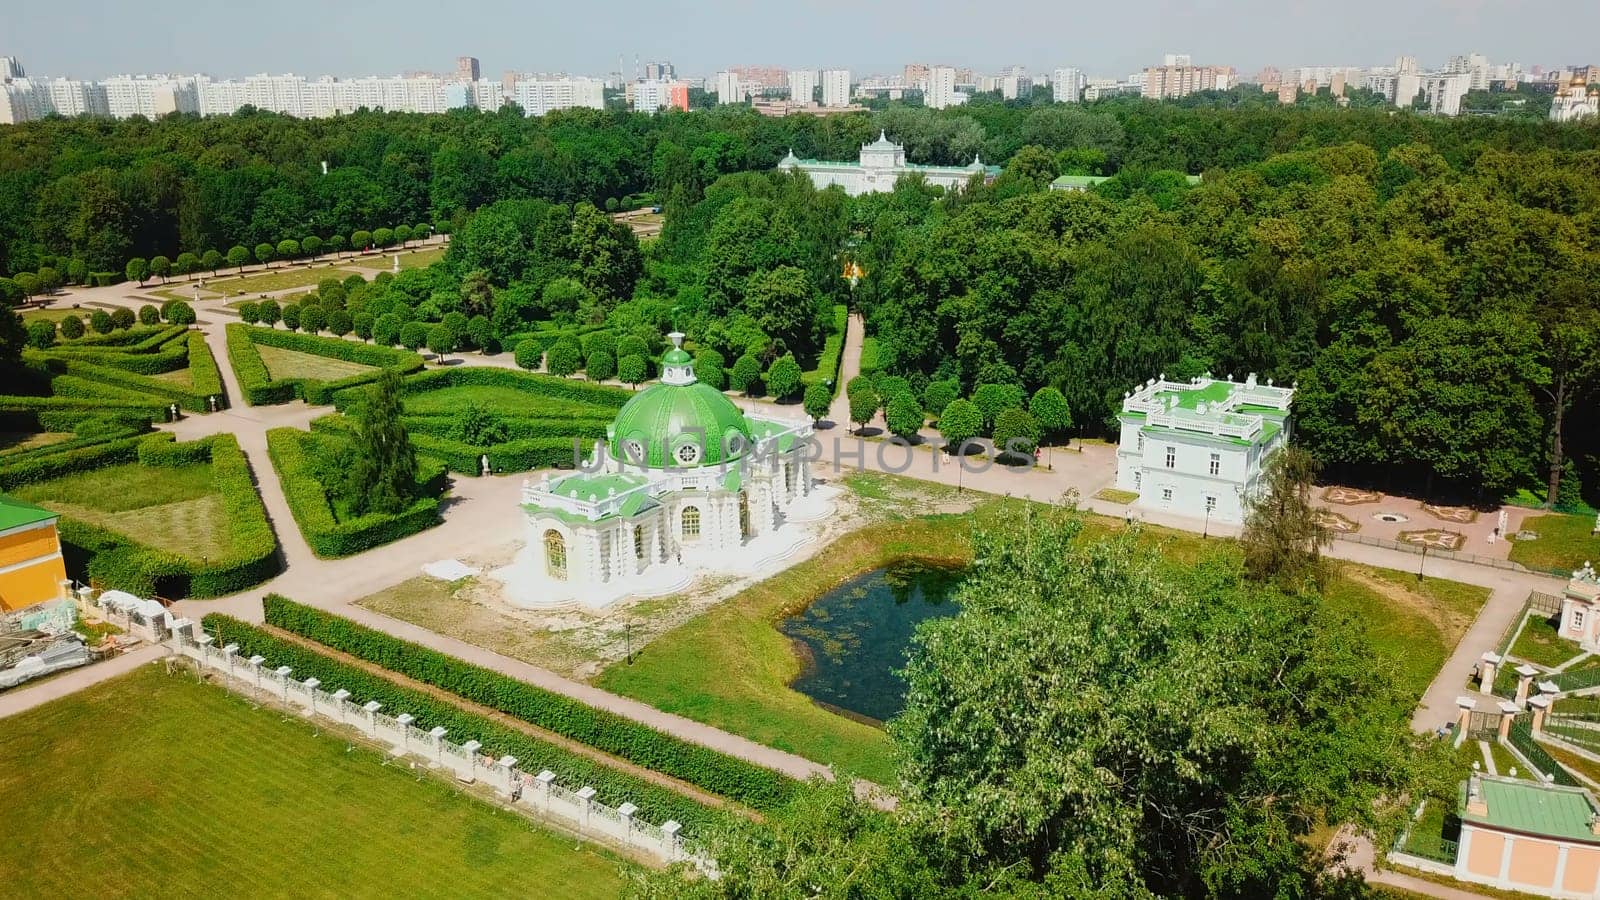 Top view of palace complex with park and pond. Creative. Landscape of palace grounds with park and pond. Beautiful summer park with green landscapes and palace buildings.